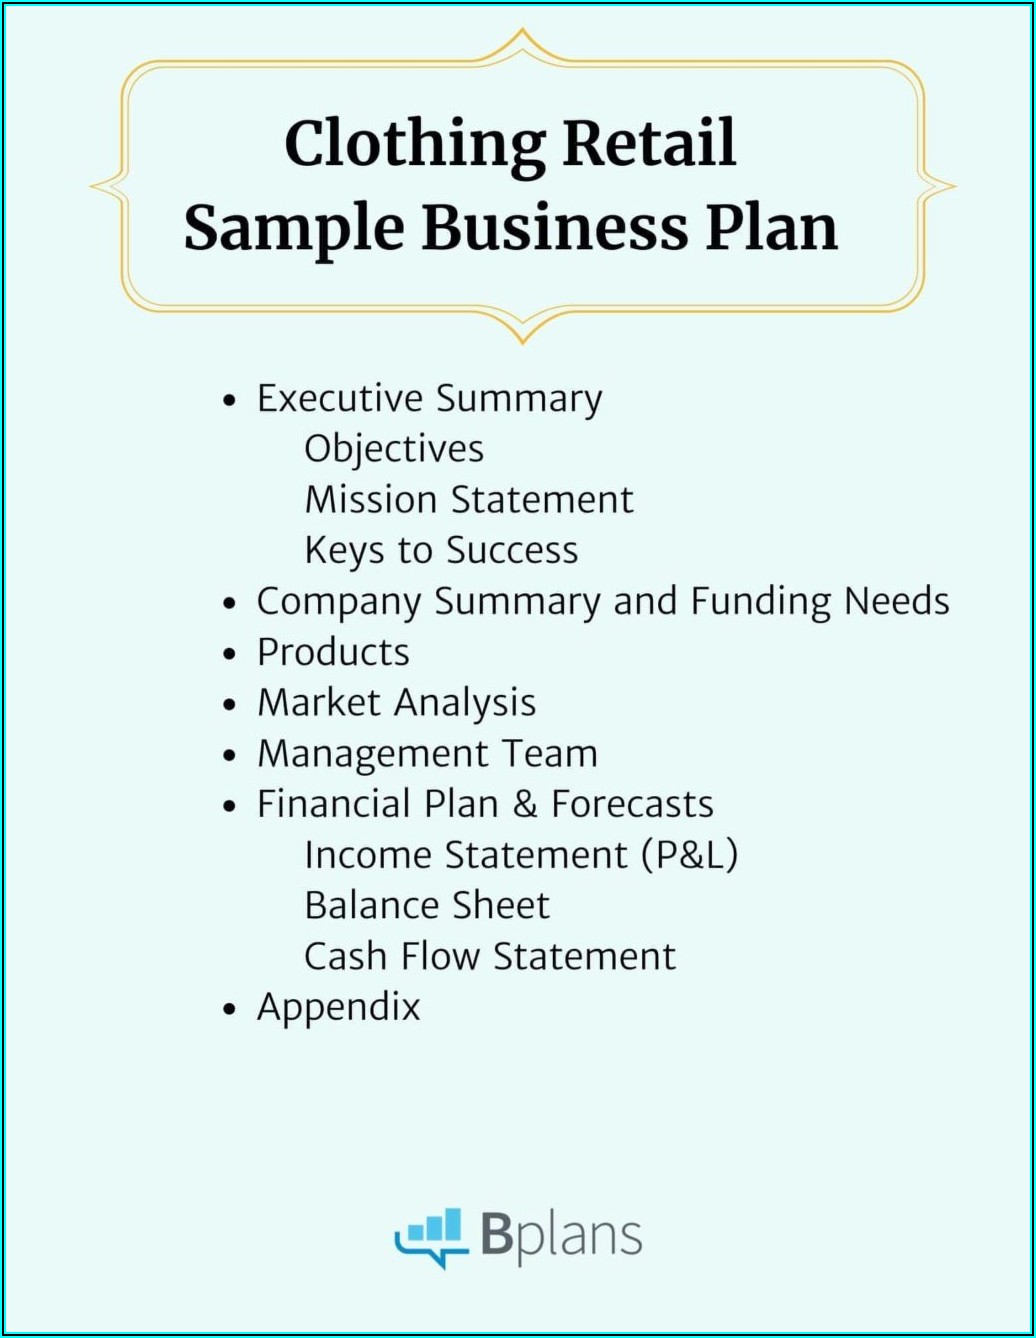 Free Business Plan Template For Retail Clothing Store